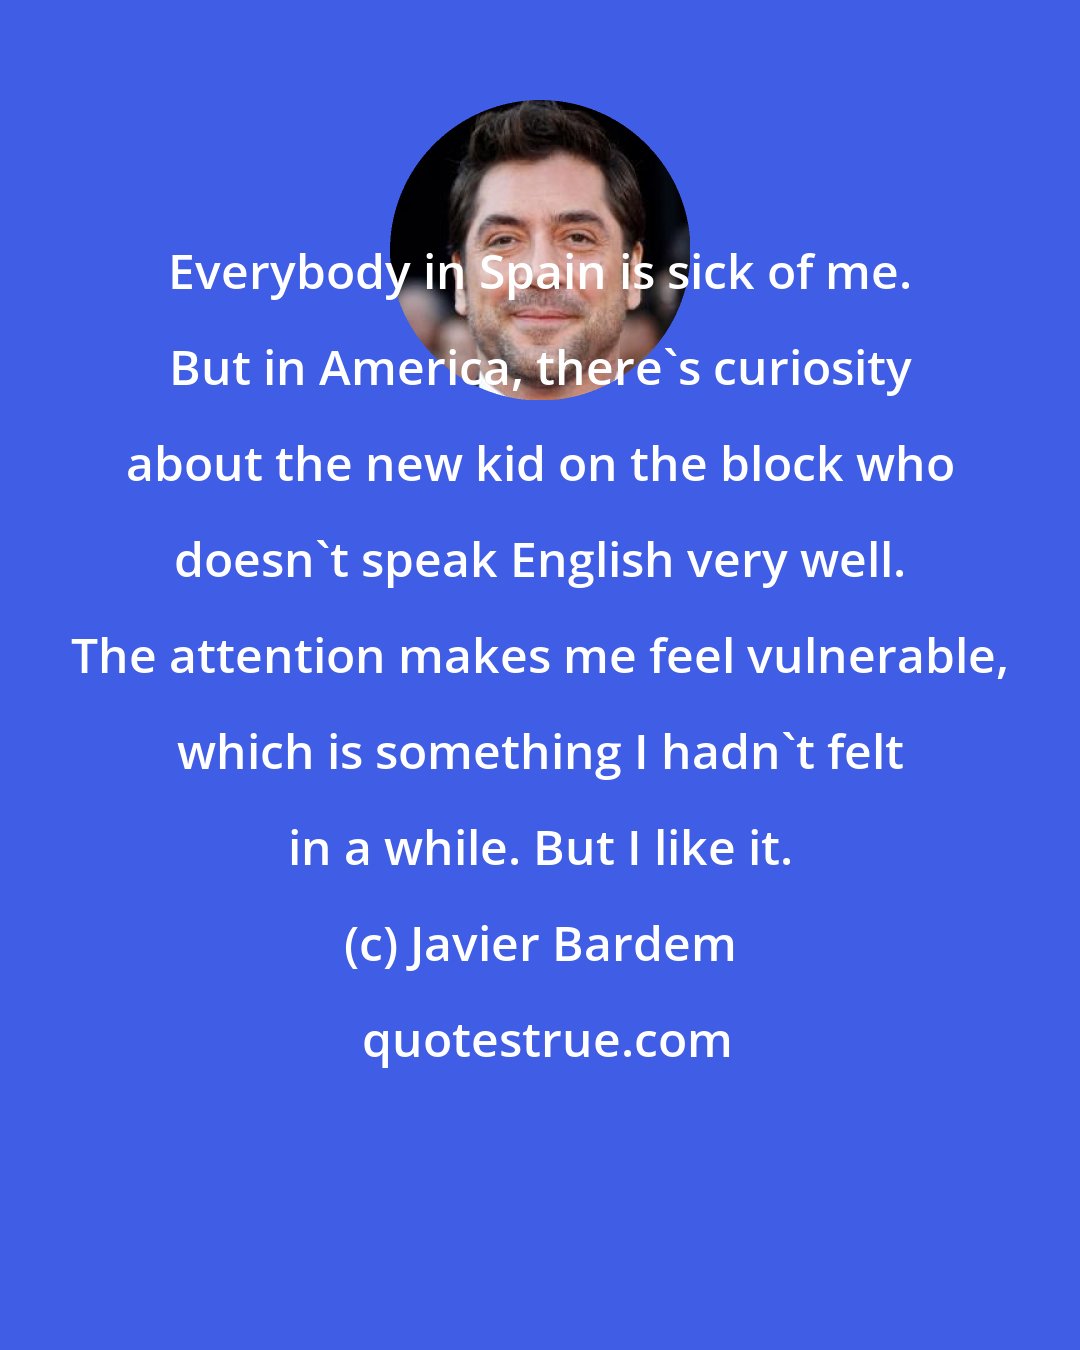 Javier Bardem: Everybody in Spain is sick of me. But in America, there's curiosity about the new kid on the block who doesn't speak English very well. The attention makes me feel vulnerable, which is something I hadn't felt in a while. But I like it.